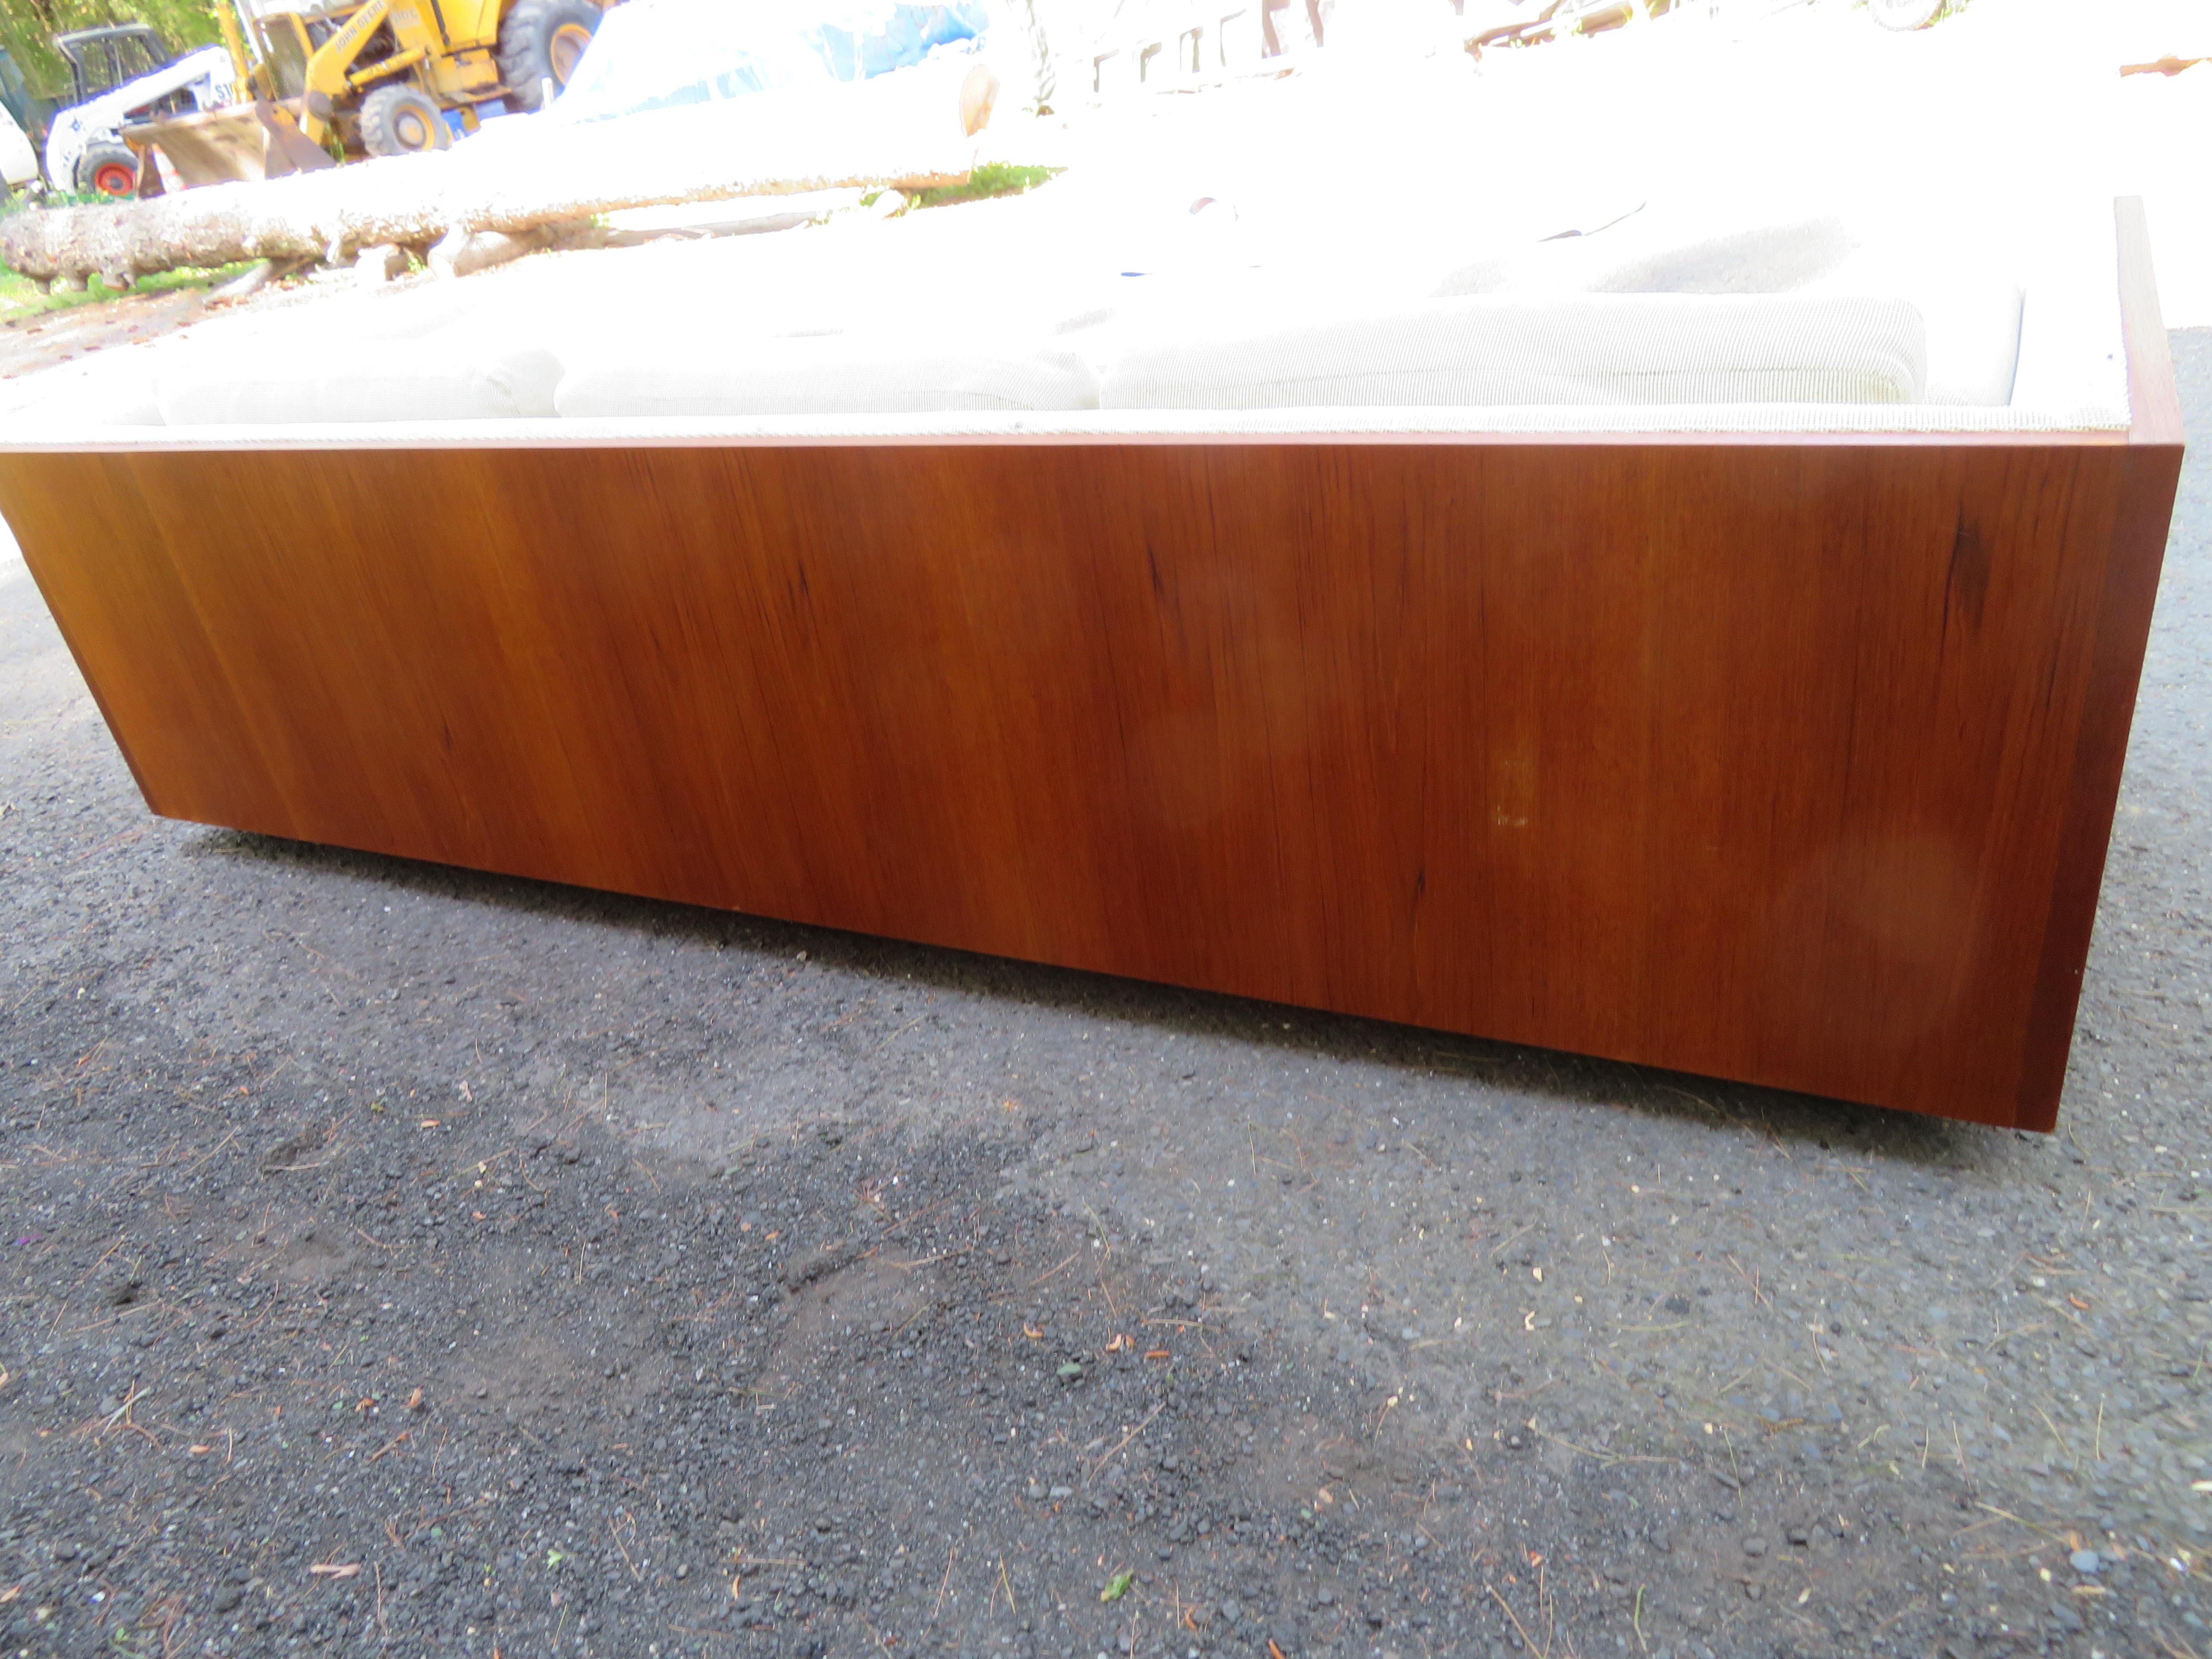 Marvelous Milo Baughman style XL Teak case sofa. This sofa is a bit longer than most others we have had measuring 28